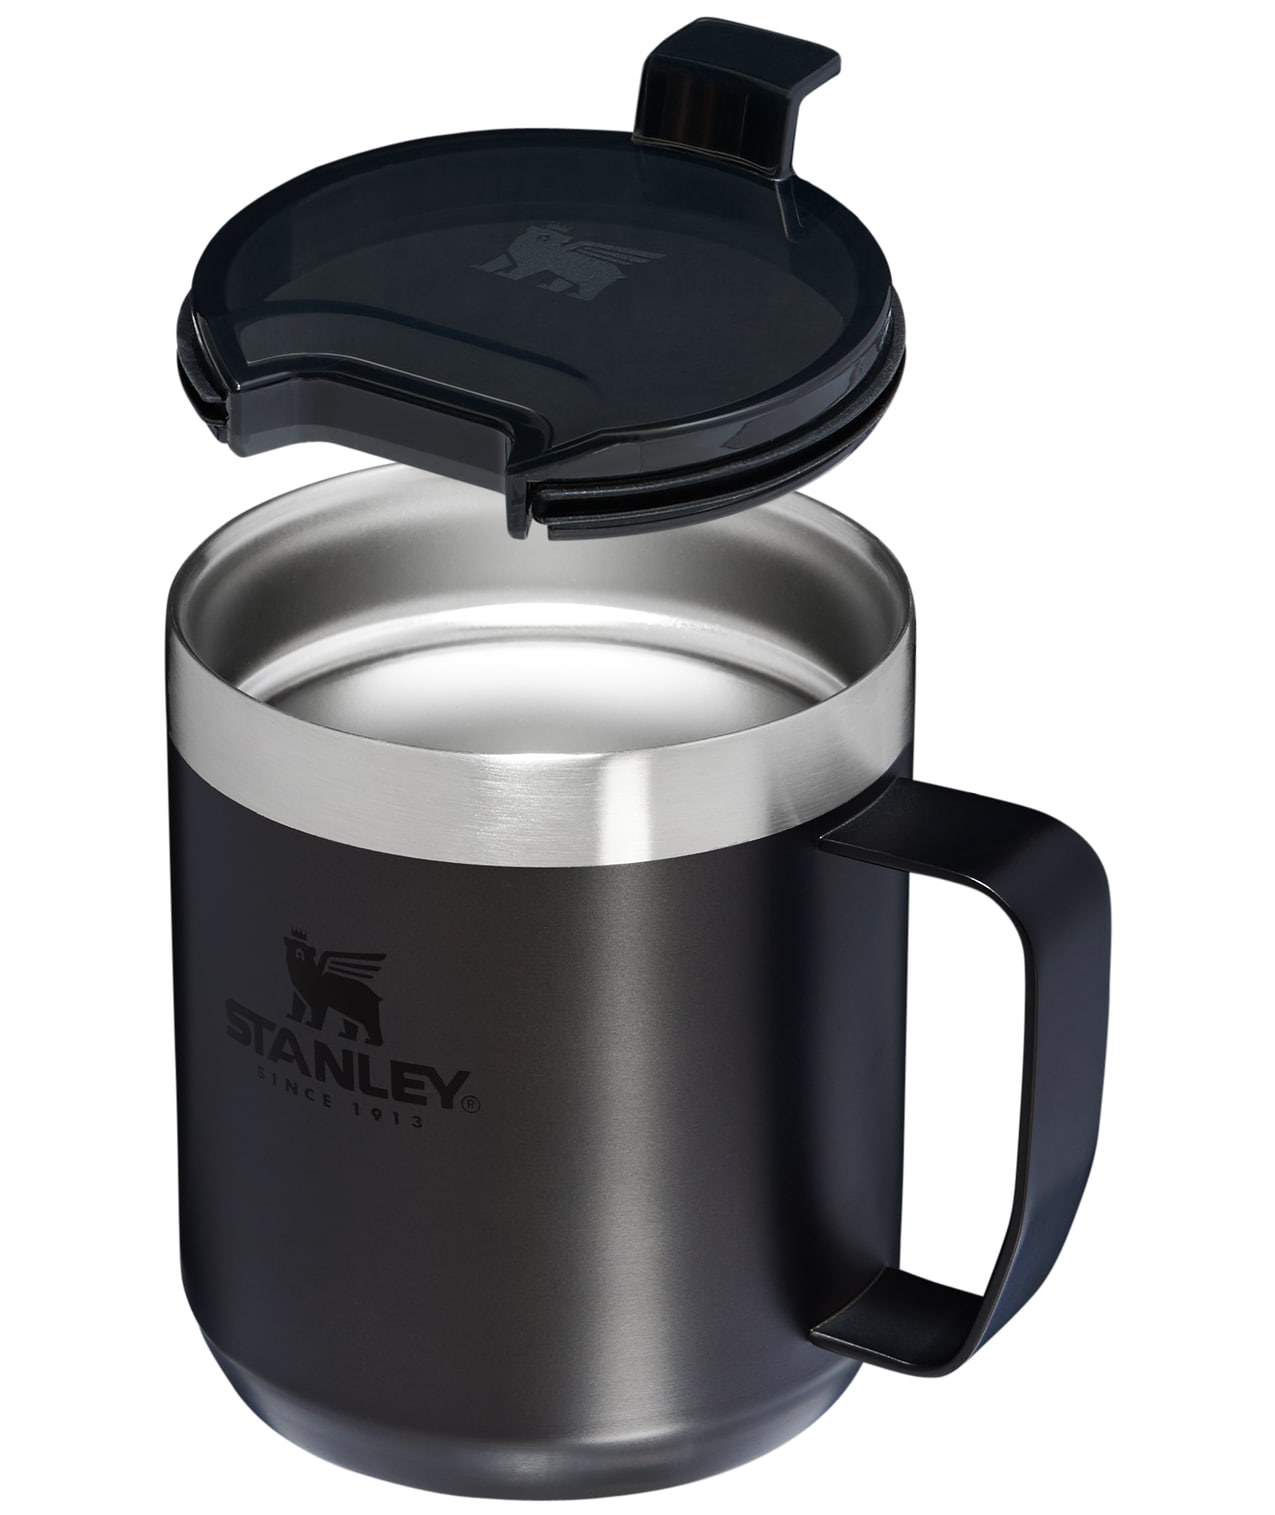 Stanley 12-fl oz Stainless Steel Insulated Travel Mug Set at